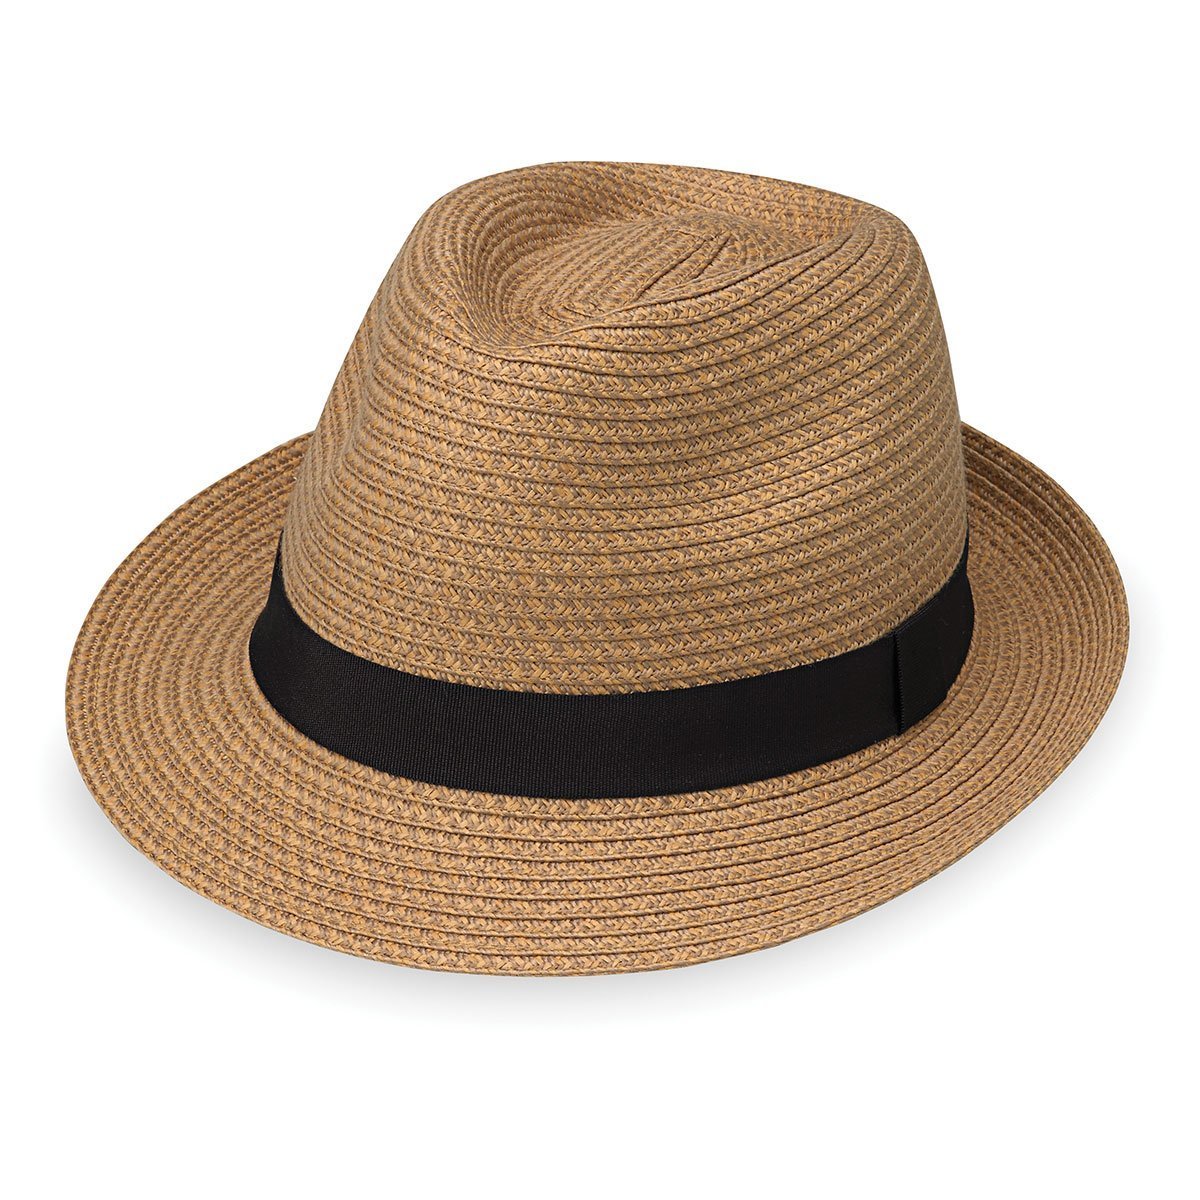 Featuring Men's Packable Fedora Style Justin Paper Braid Sun Hat in Natural from Wallaroo